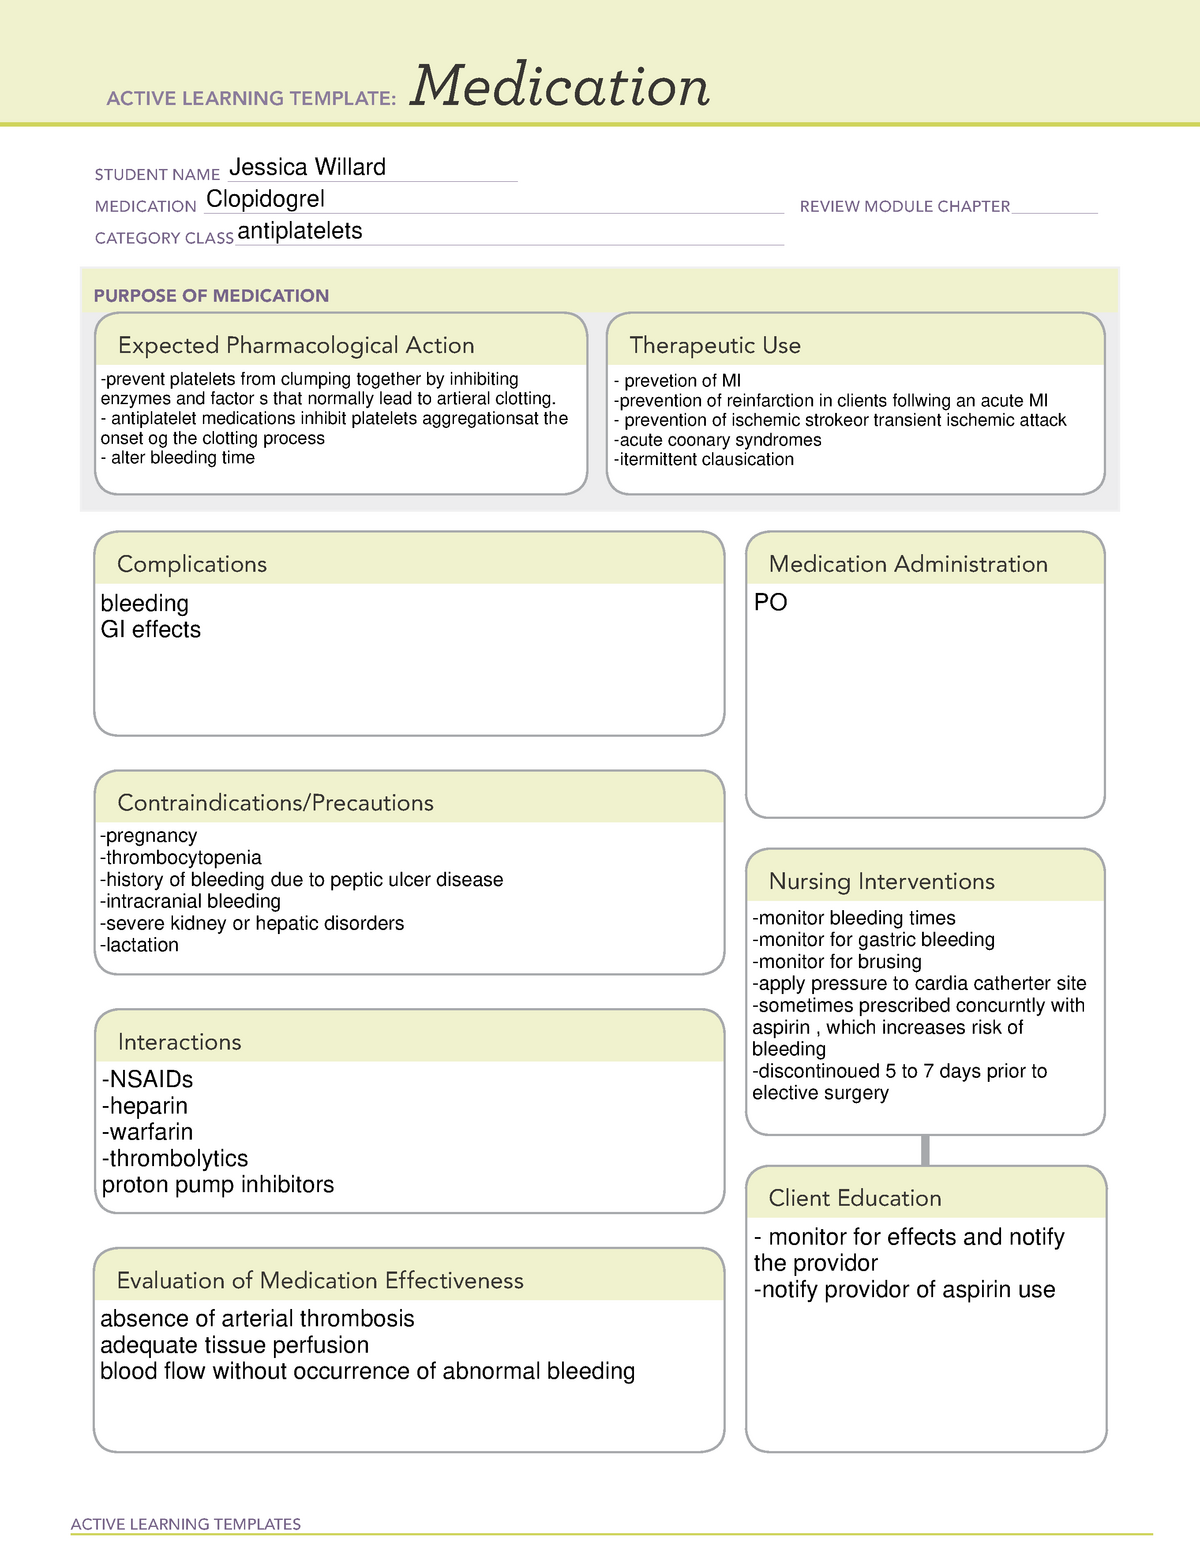 clopidogrel-ati-learning-templete-active-learning-templates